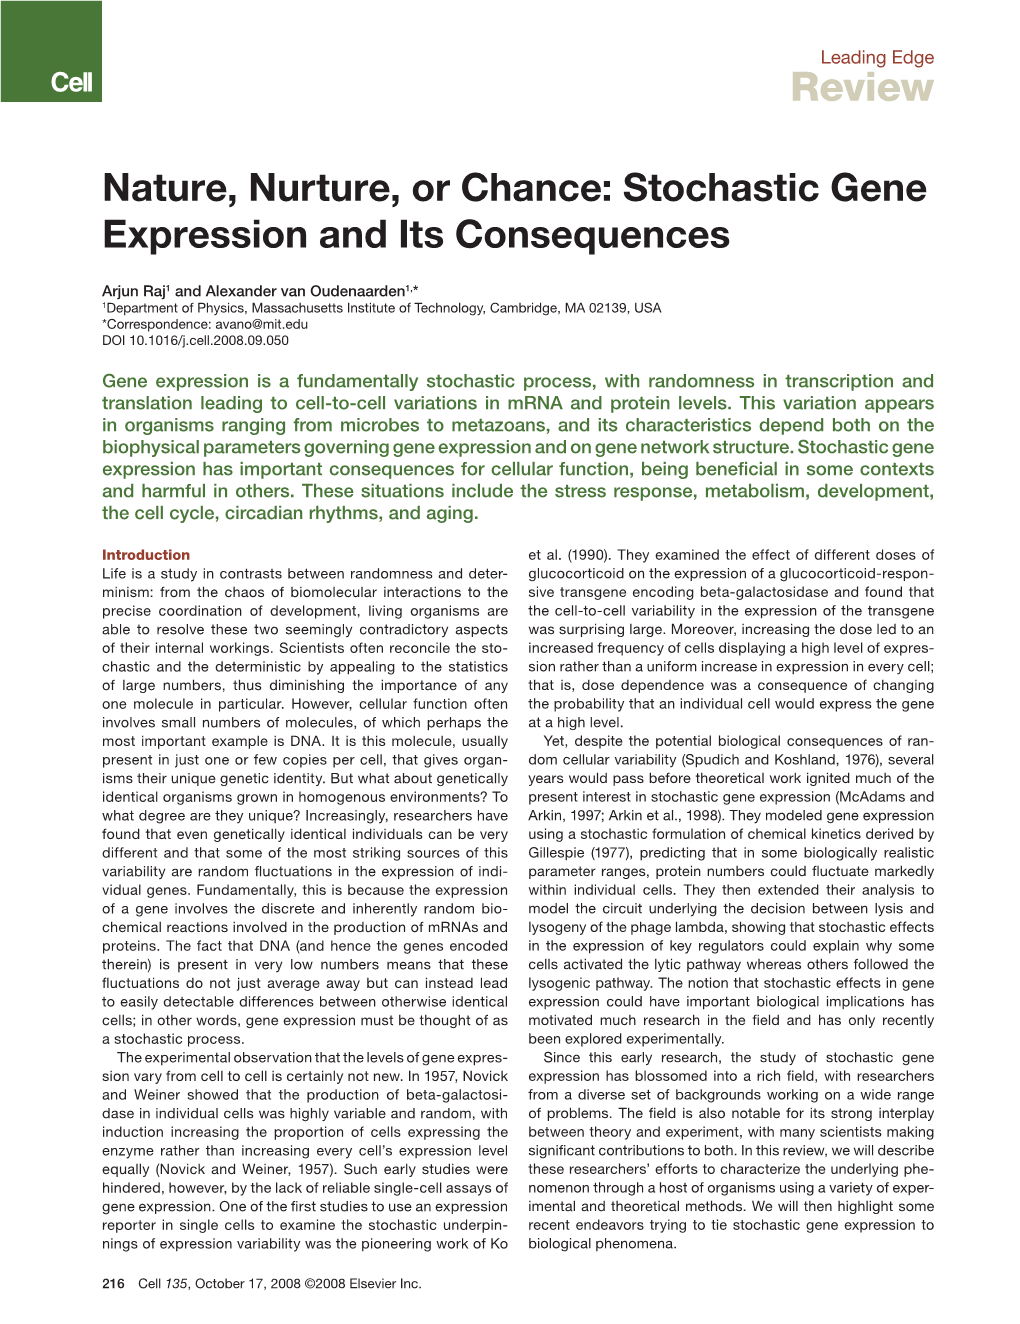 Nature, Nurture, Or Chance: Stochastic Gene Expression and Its Consequences